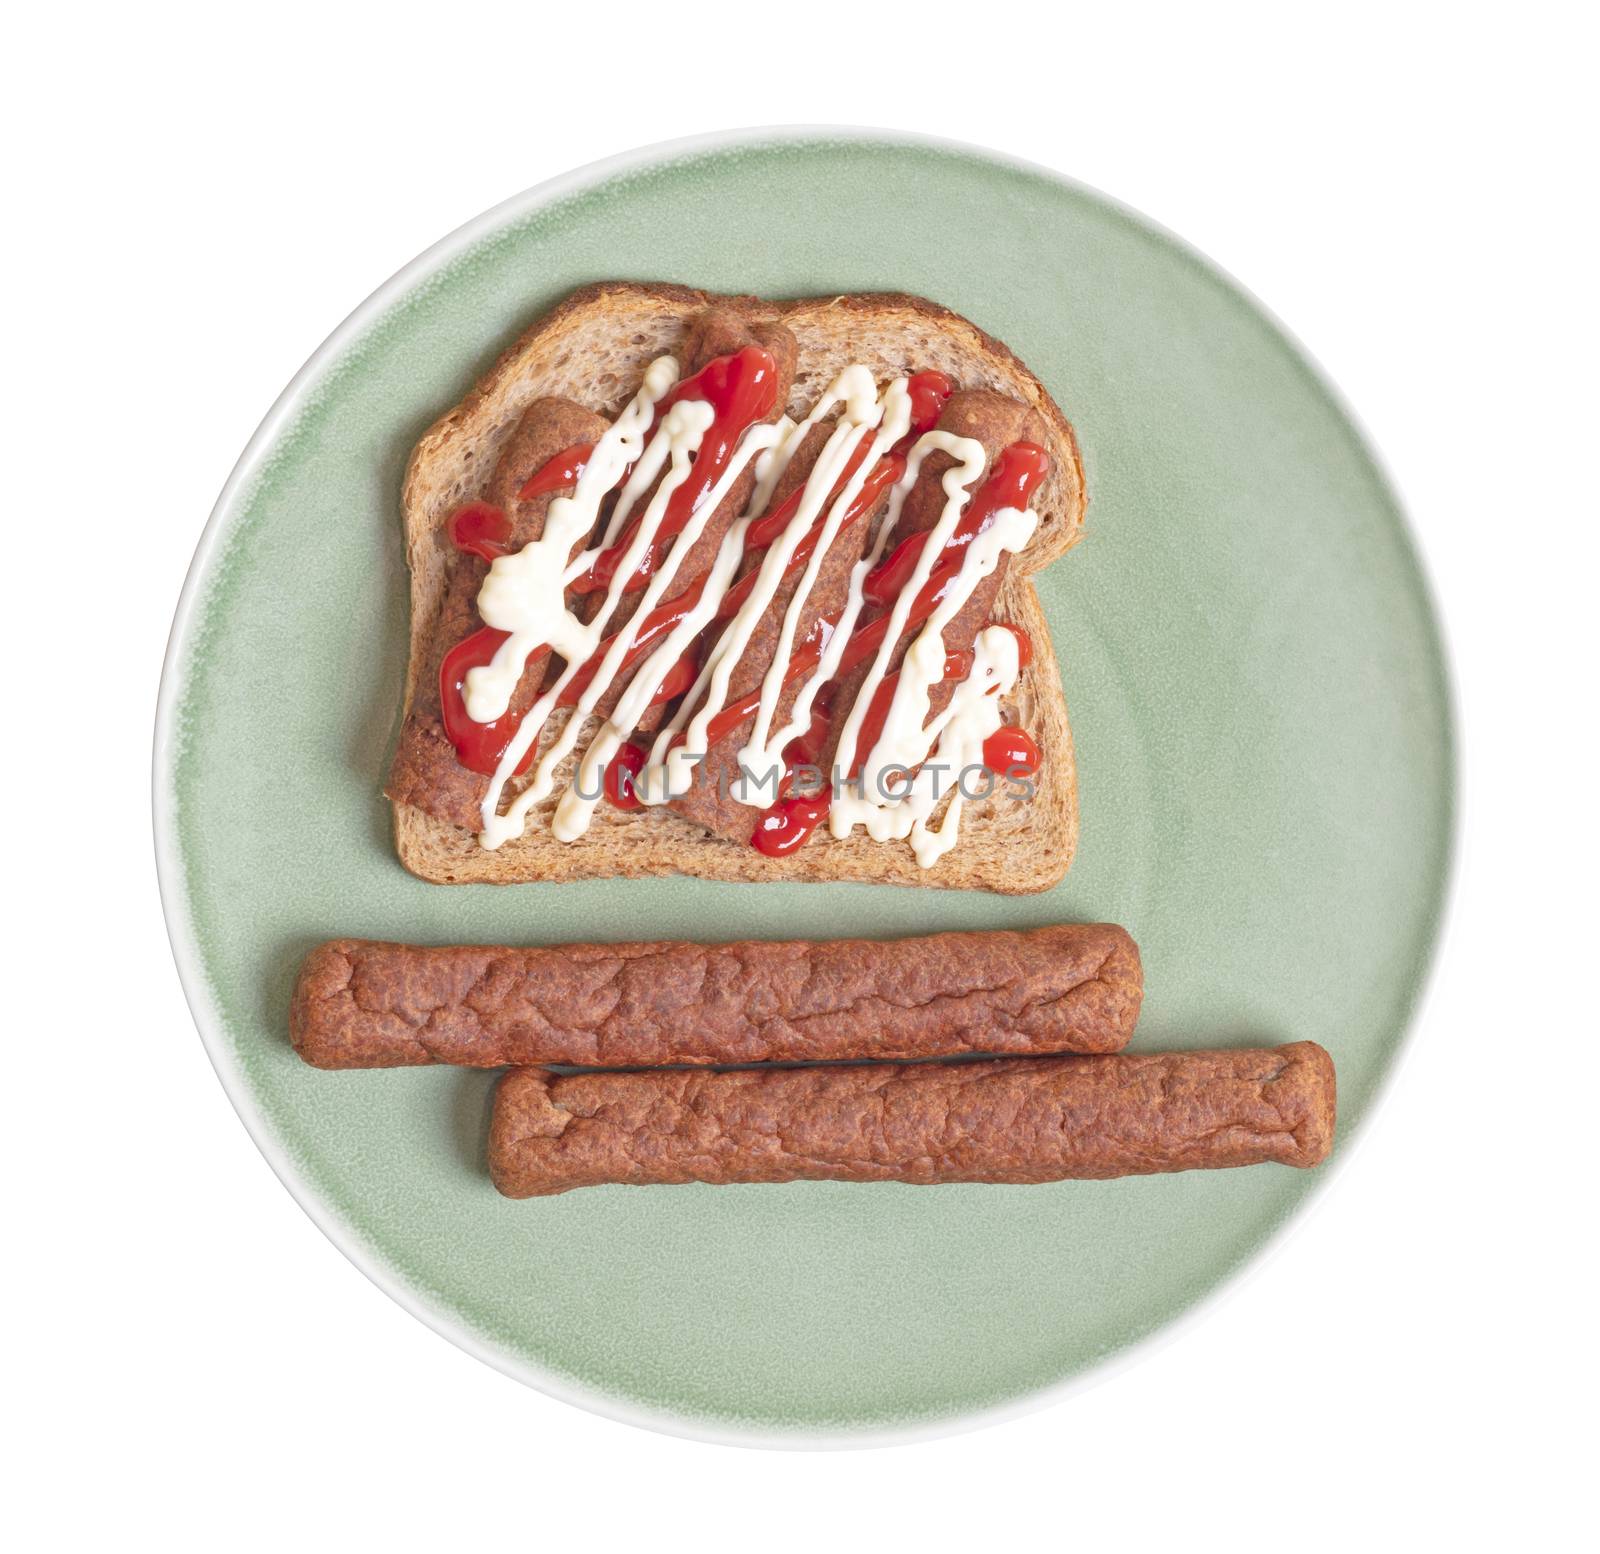 Chopped up frikadel with ketchup and mayonnaise on a piece of bread, on a plate, a Dutch fast food snack